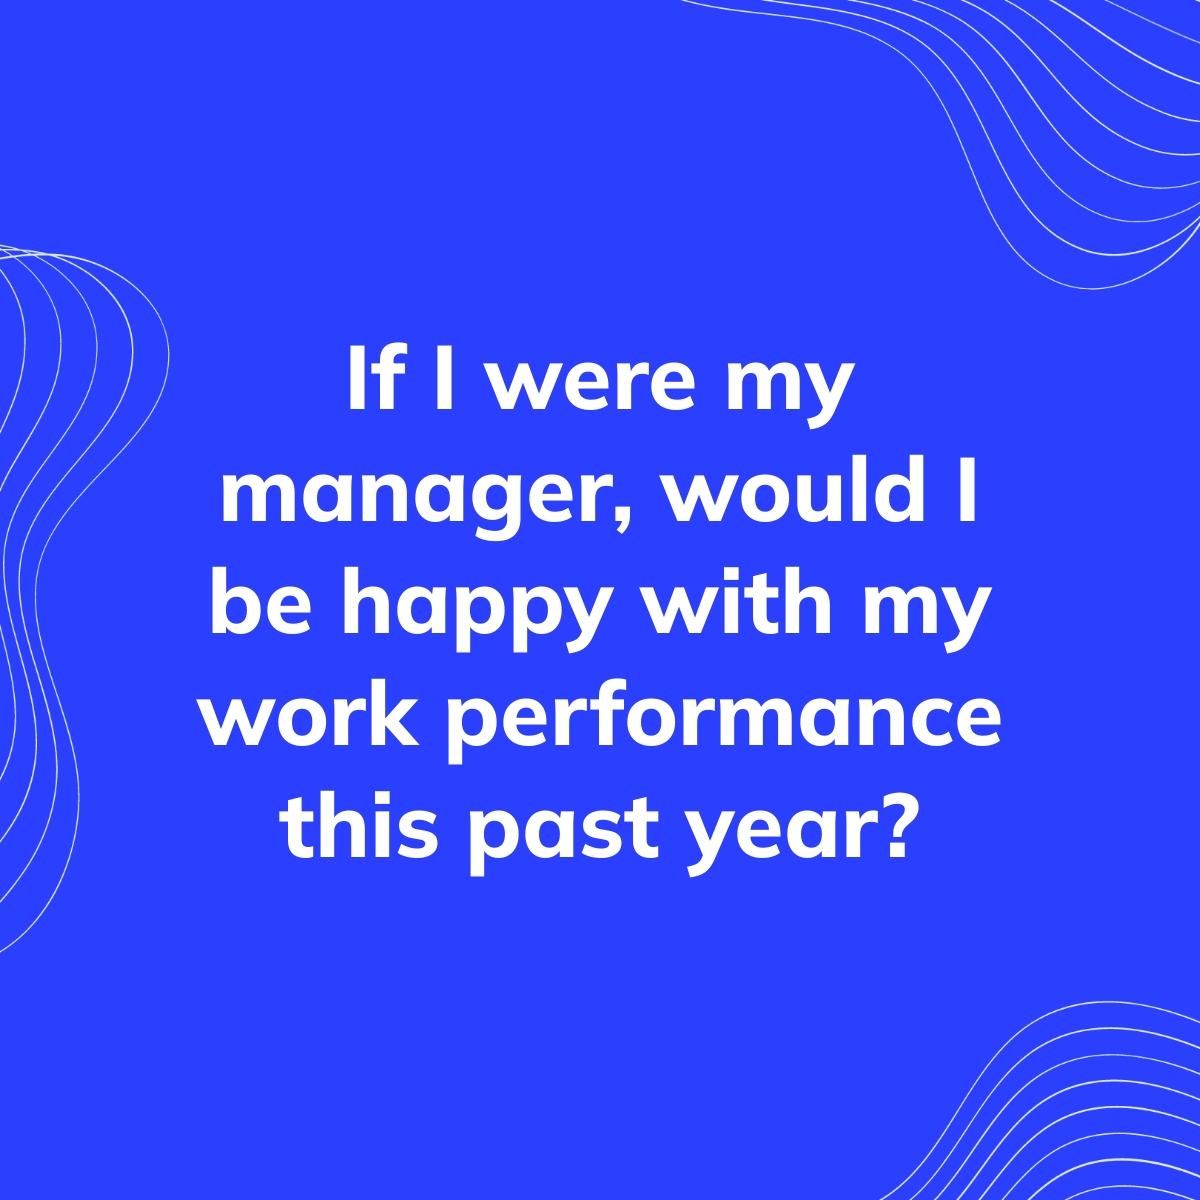 Journal Prompt: If I were my manager, would I be happy with my work performance this past year?